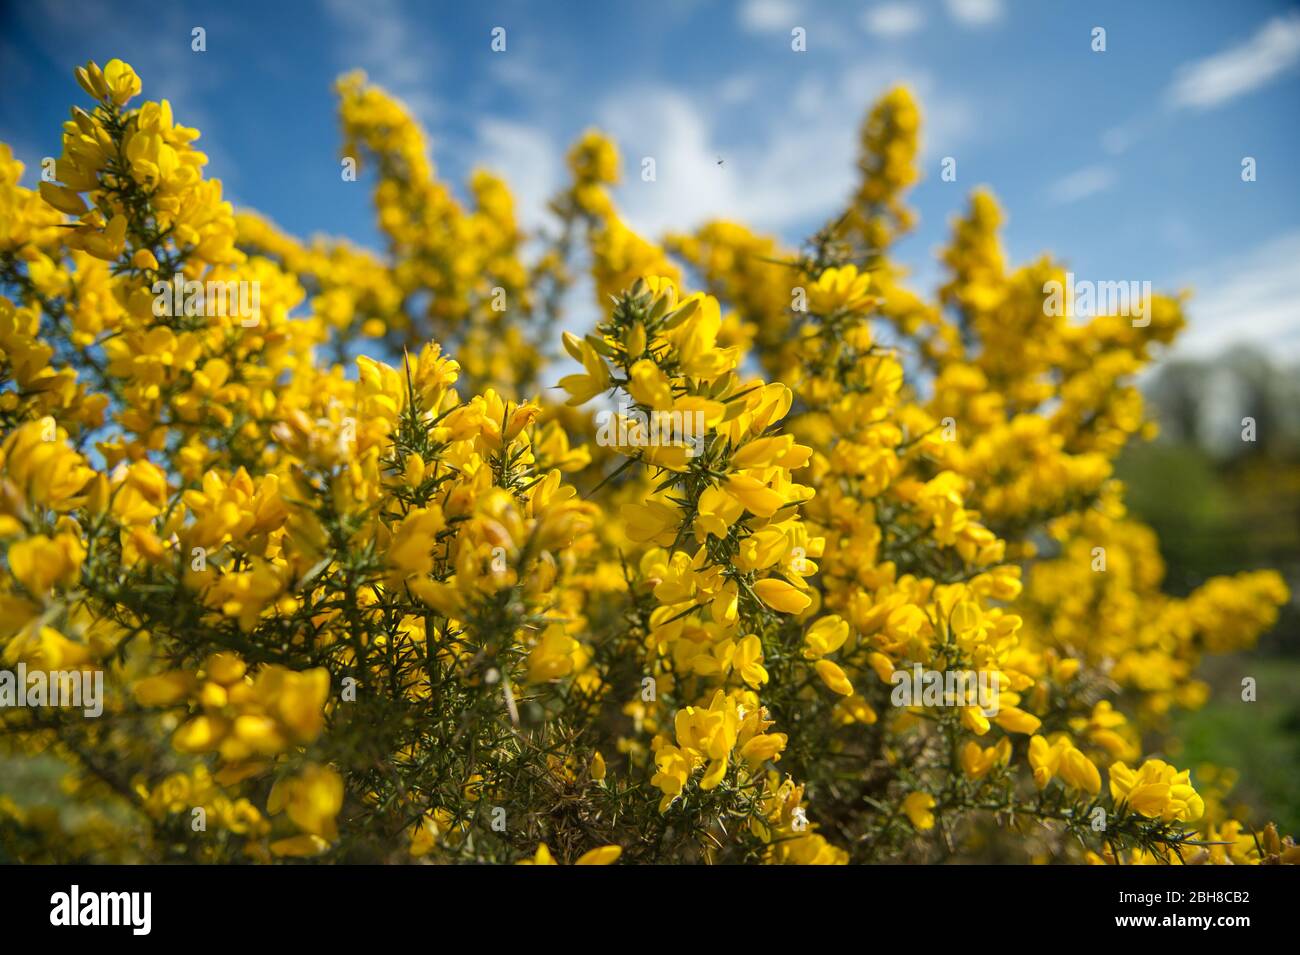 Cumbernauld, UK. 24th Apr, 2020. Pictured: Gorse bushes bloom with bright yellow flowers which mask the jaggy thorns which this shrub is known for. Hot afternoon sunshine out in the countryside just outside of Cumbernauld in North Lanarkshire. Credit: Colin Fisher/Alamy Live News Stock Photo